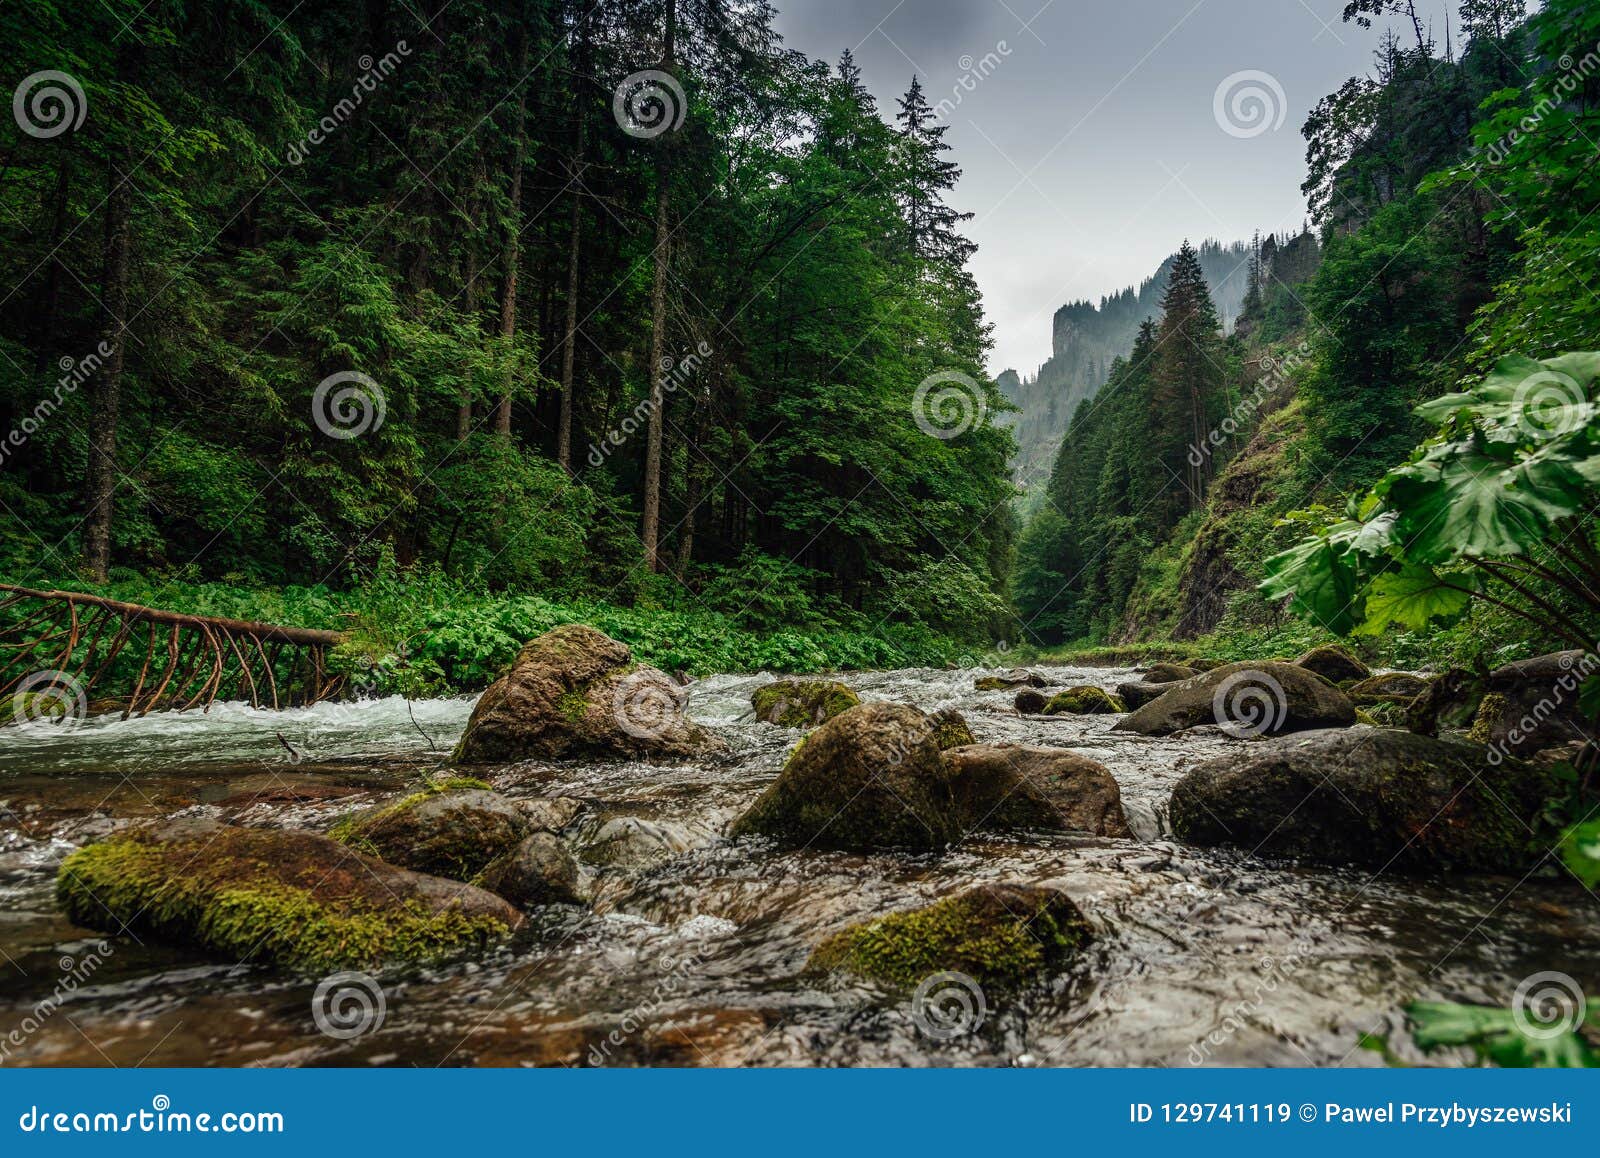 Mountain Creek River Flowing Between The Forest Stock Image Image